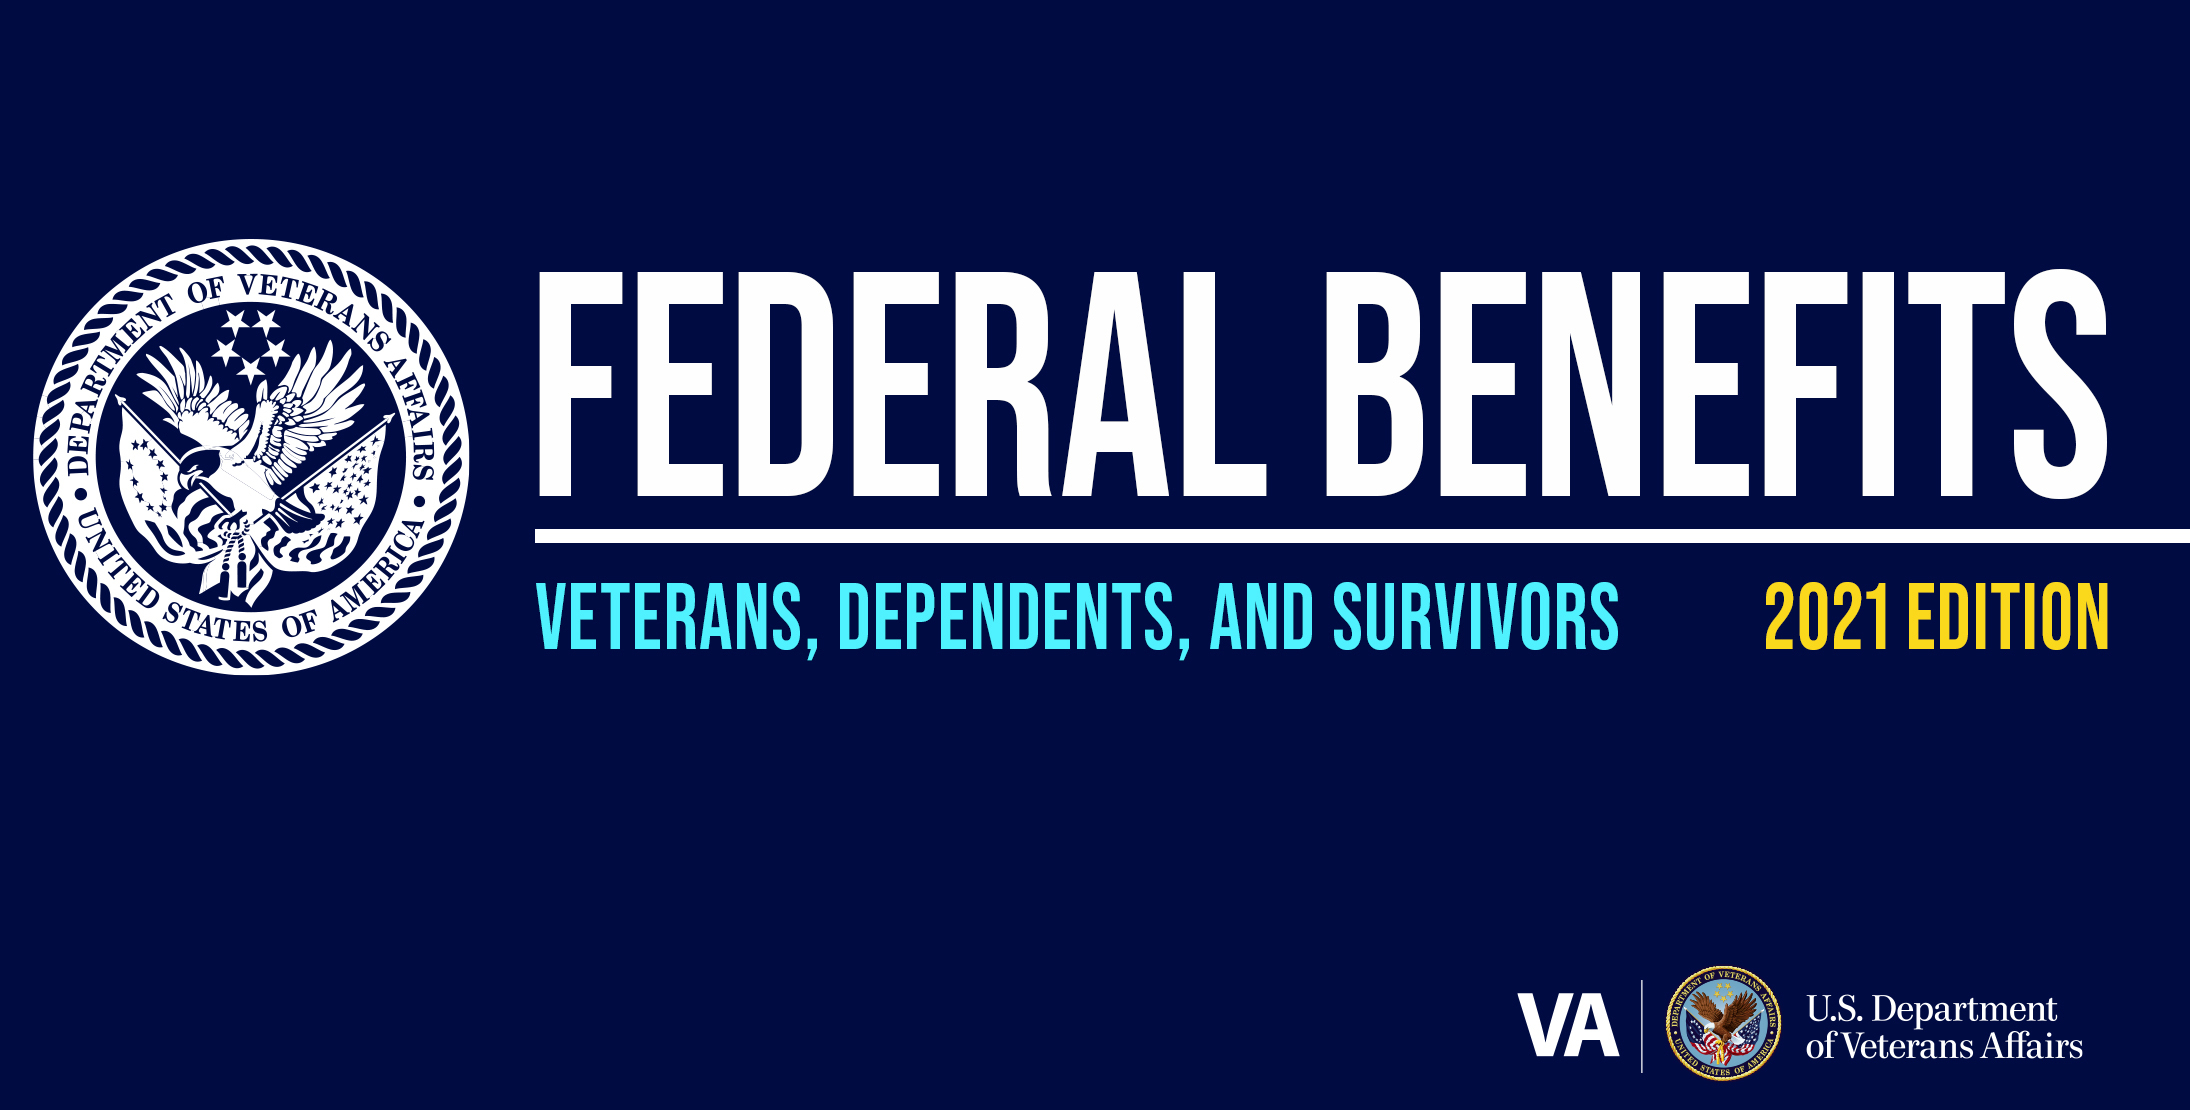 Veteran and family member can access to benefits and services at www.va.gov/getstarted and through two handbooks on the page.